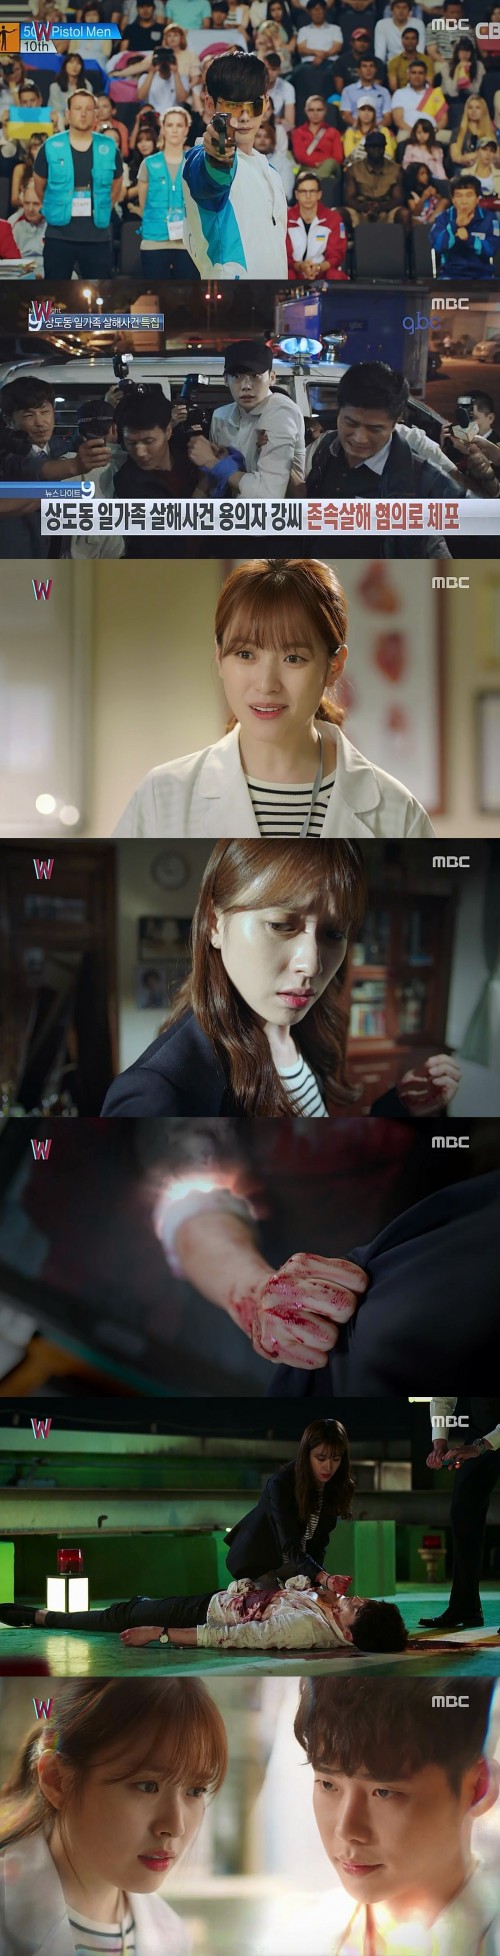 w-ep1